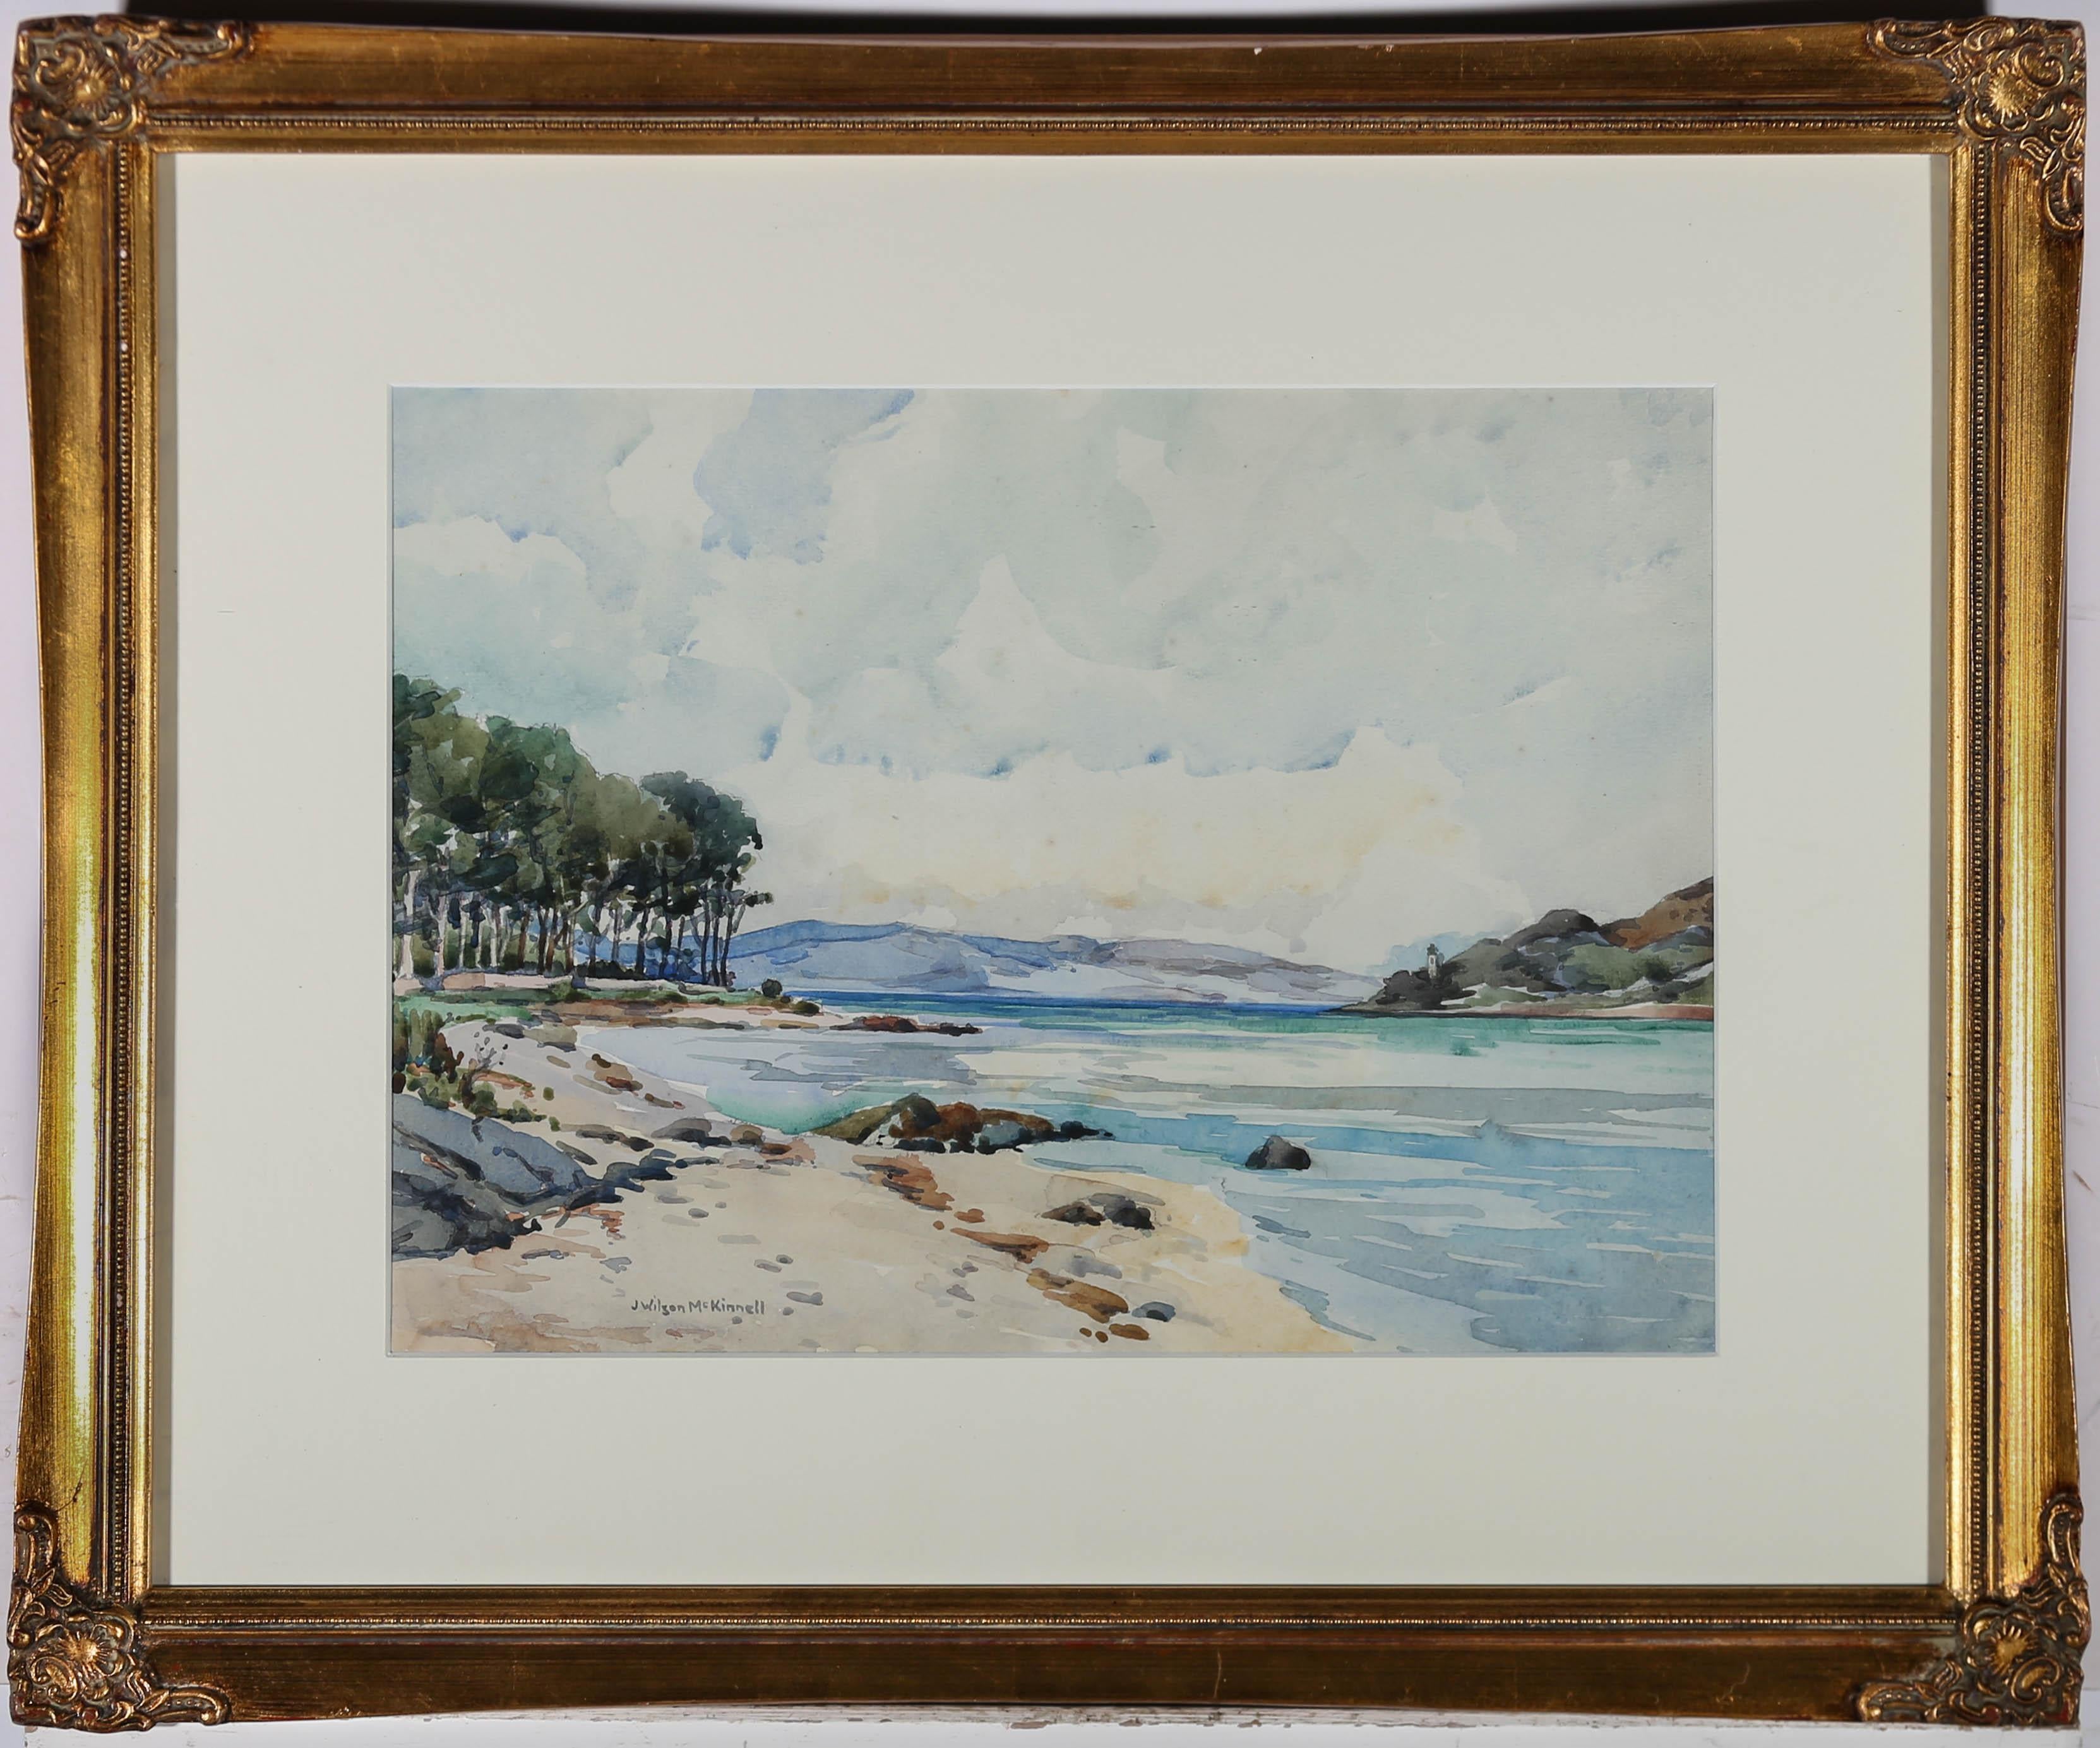 A pleasant and refreshing watercolour landscape of Campbeltown loch, by the well listed Scottish artist, James Wilson McKinnell. Signed to the lower left. Fixed to the reverse is a label inscribed with the title and artist name. Presented in a